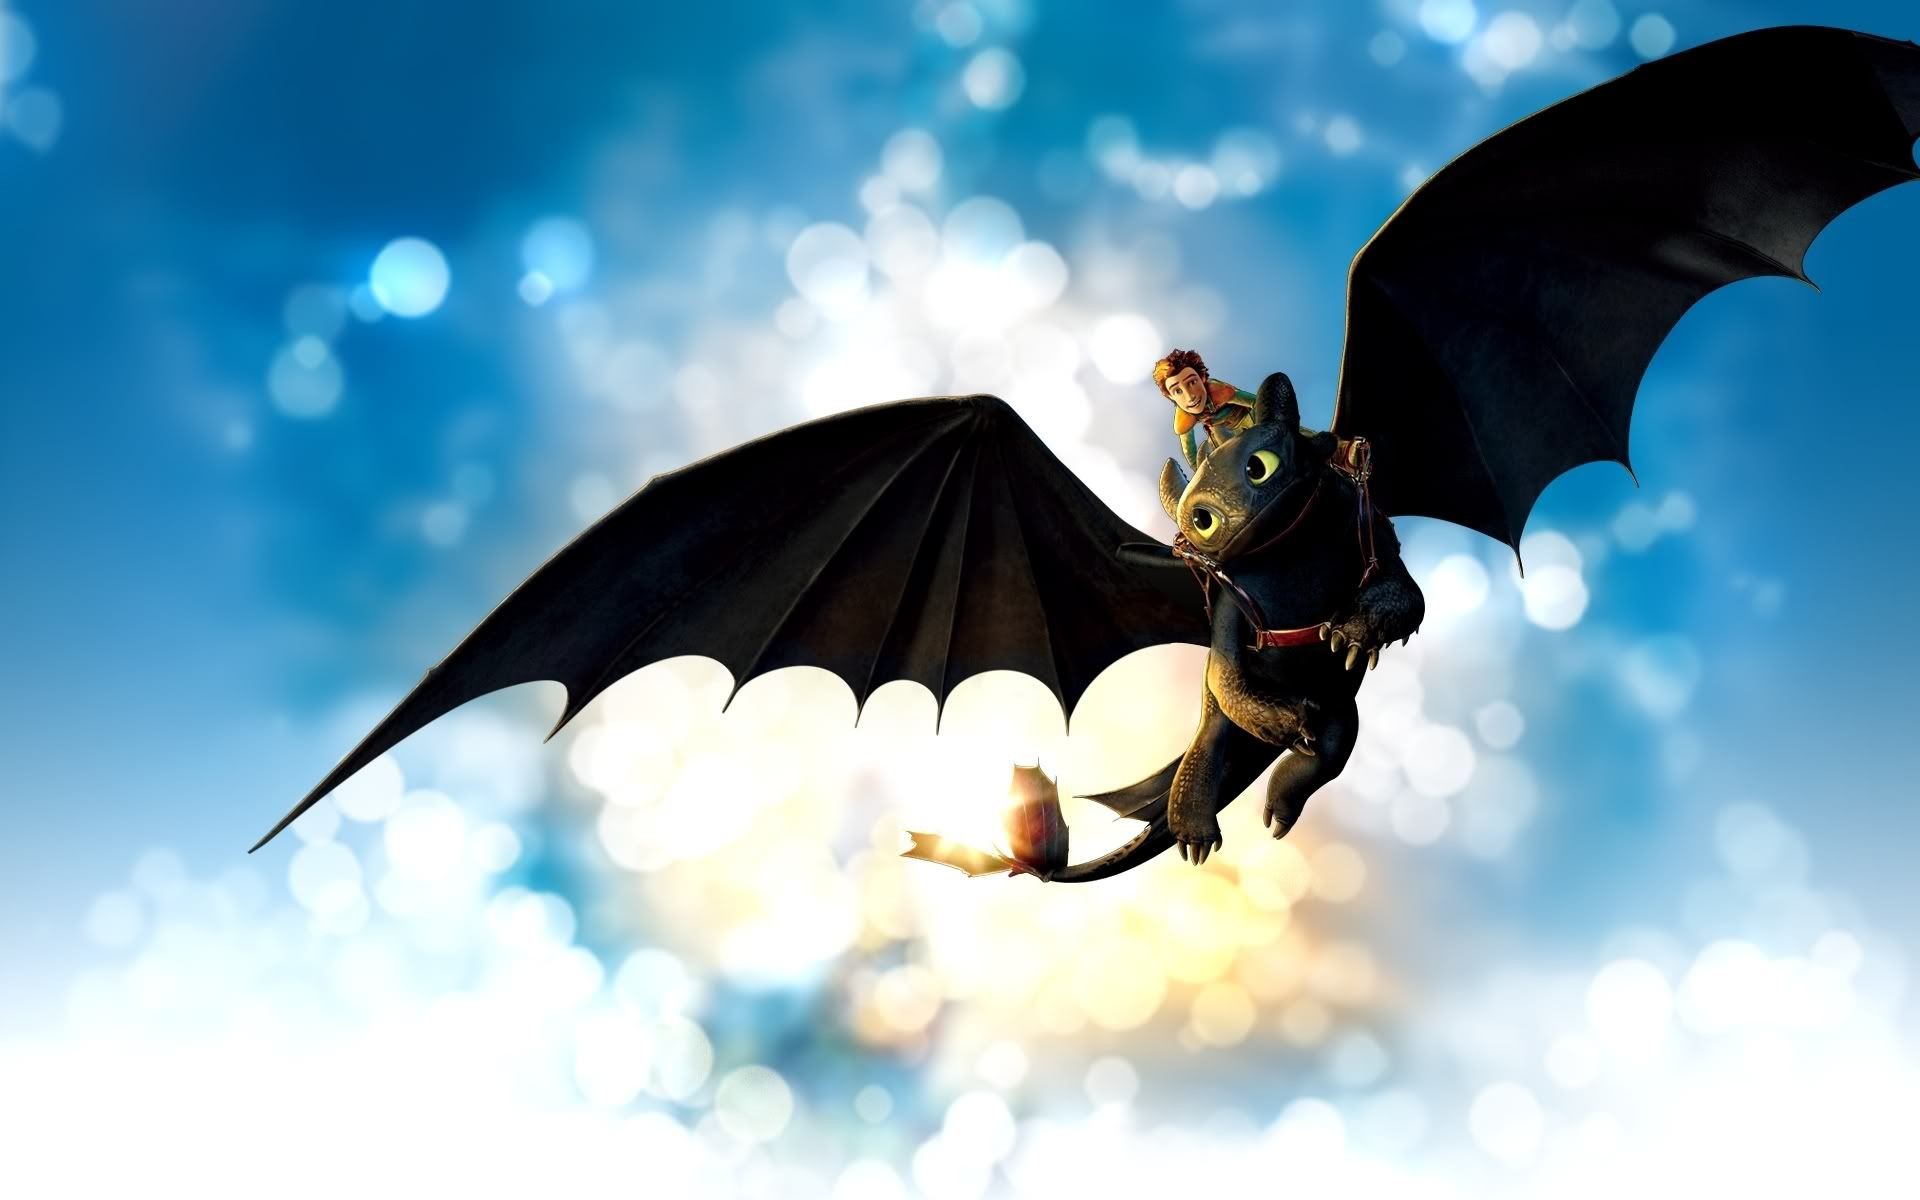 Toothless The Dragon Wallpapers 46 Wallpapers 1920x1200